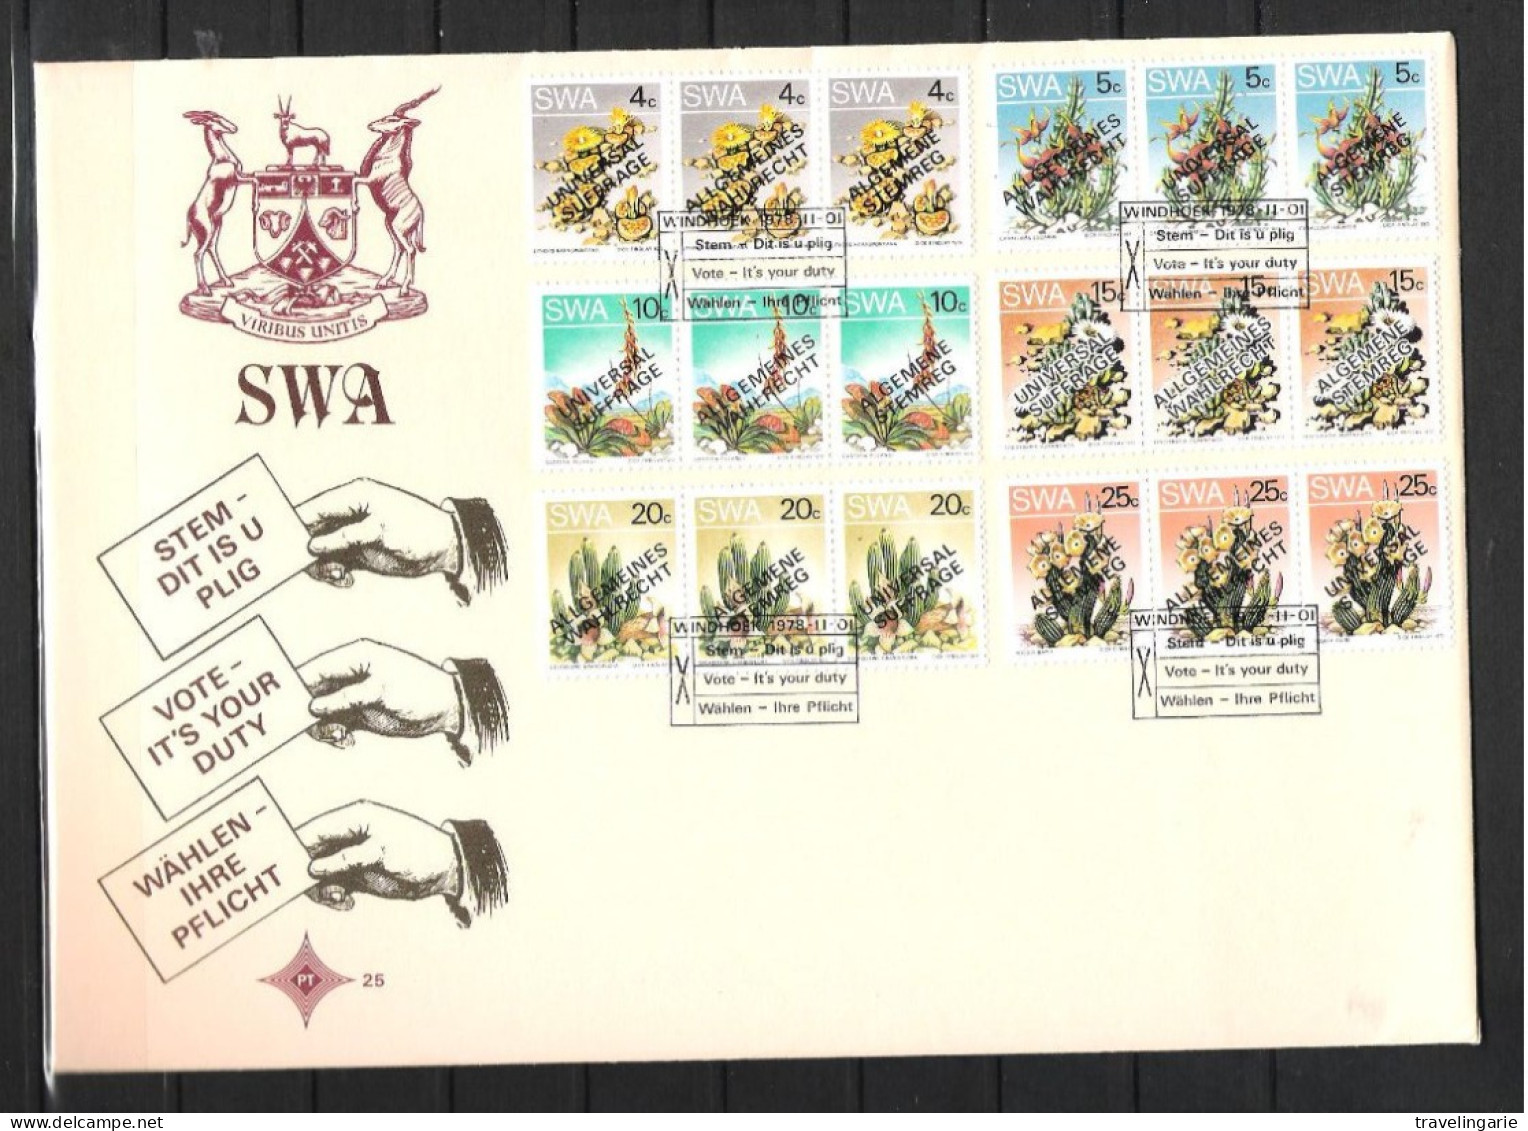 South West Africa 1978 Election Overprint Cactus Stamps FDC No. 25 - Cactusses